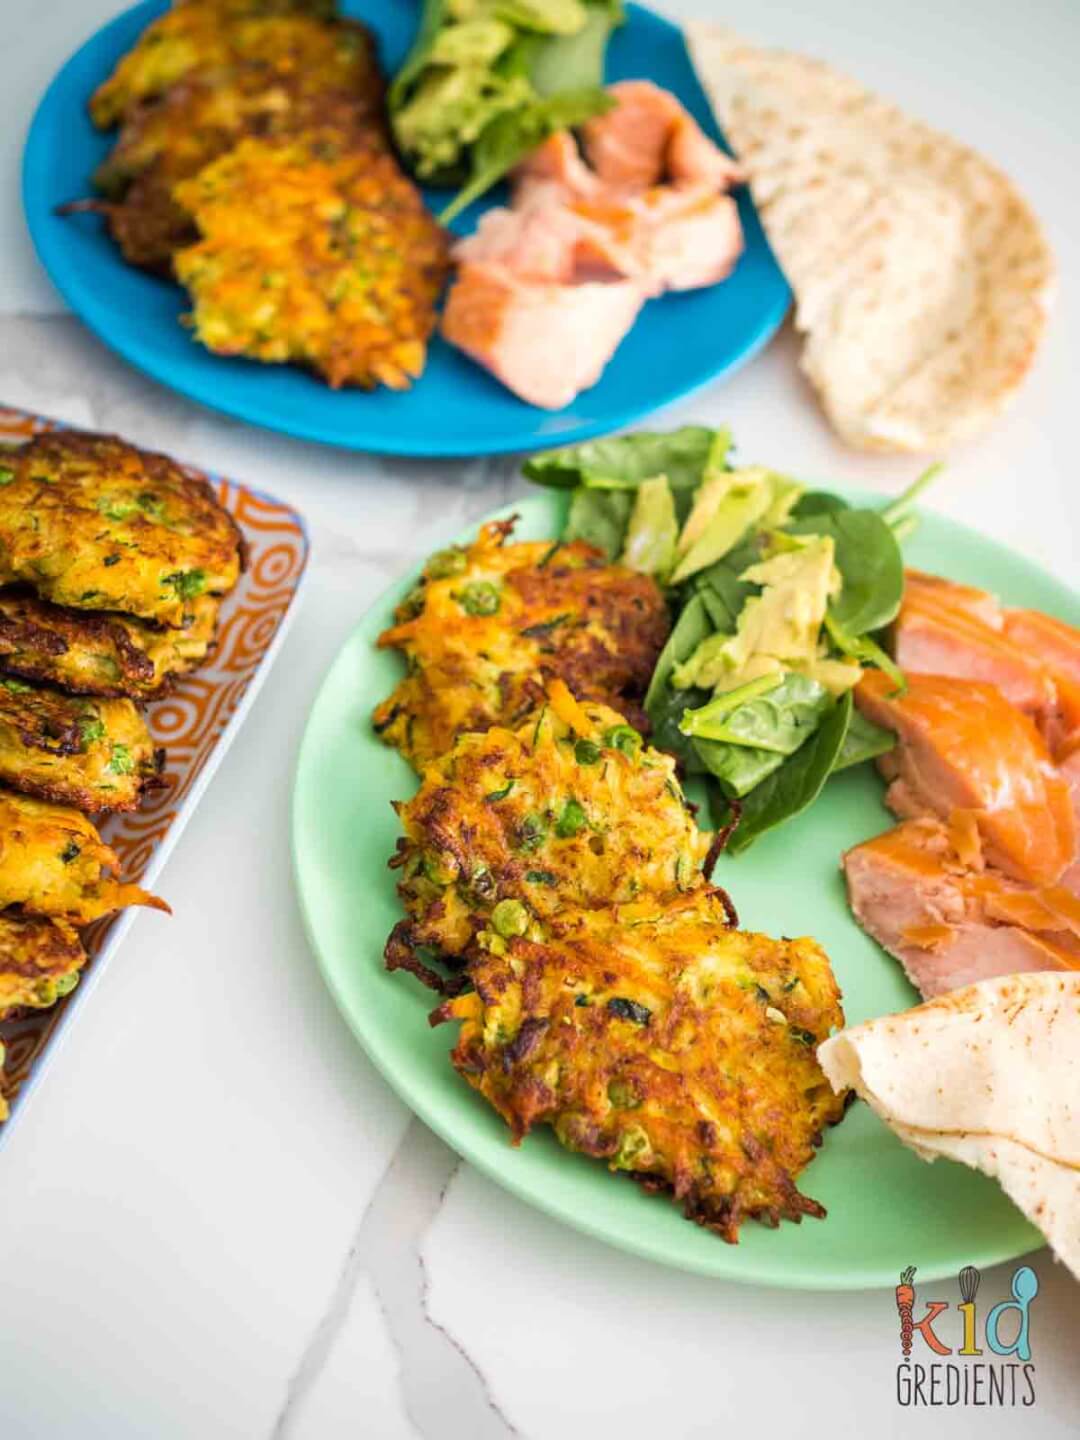 Zucchini, carrot and Pea fritters on a plate with salmon and salad